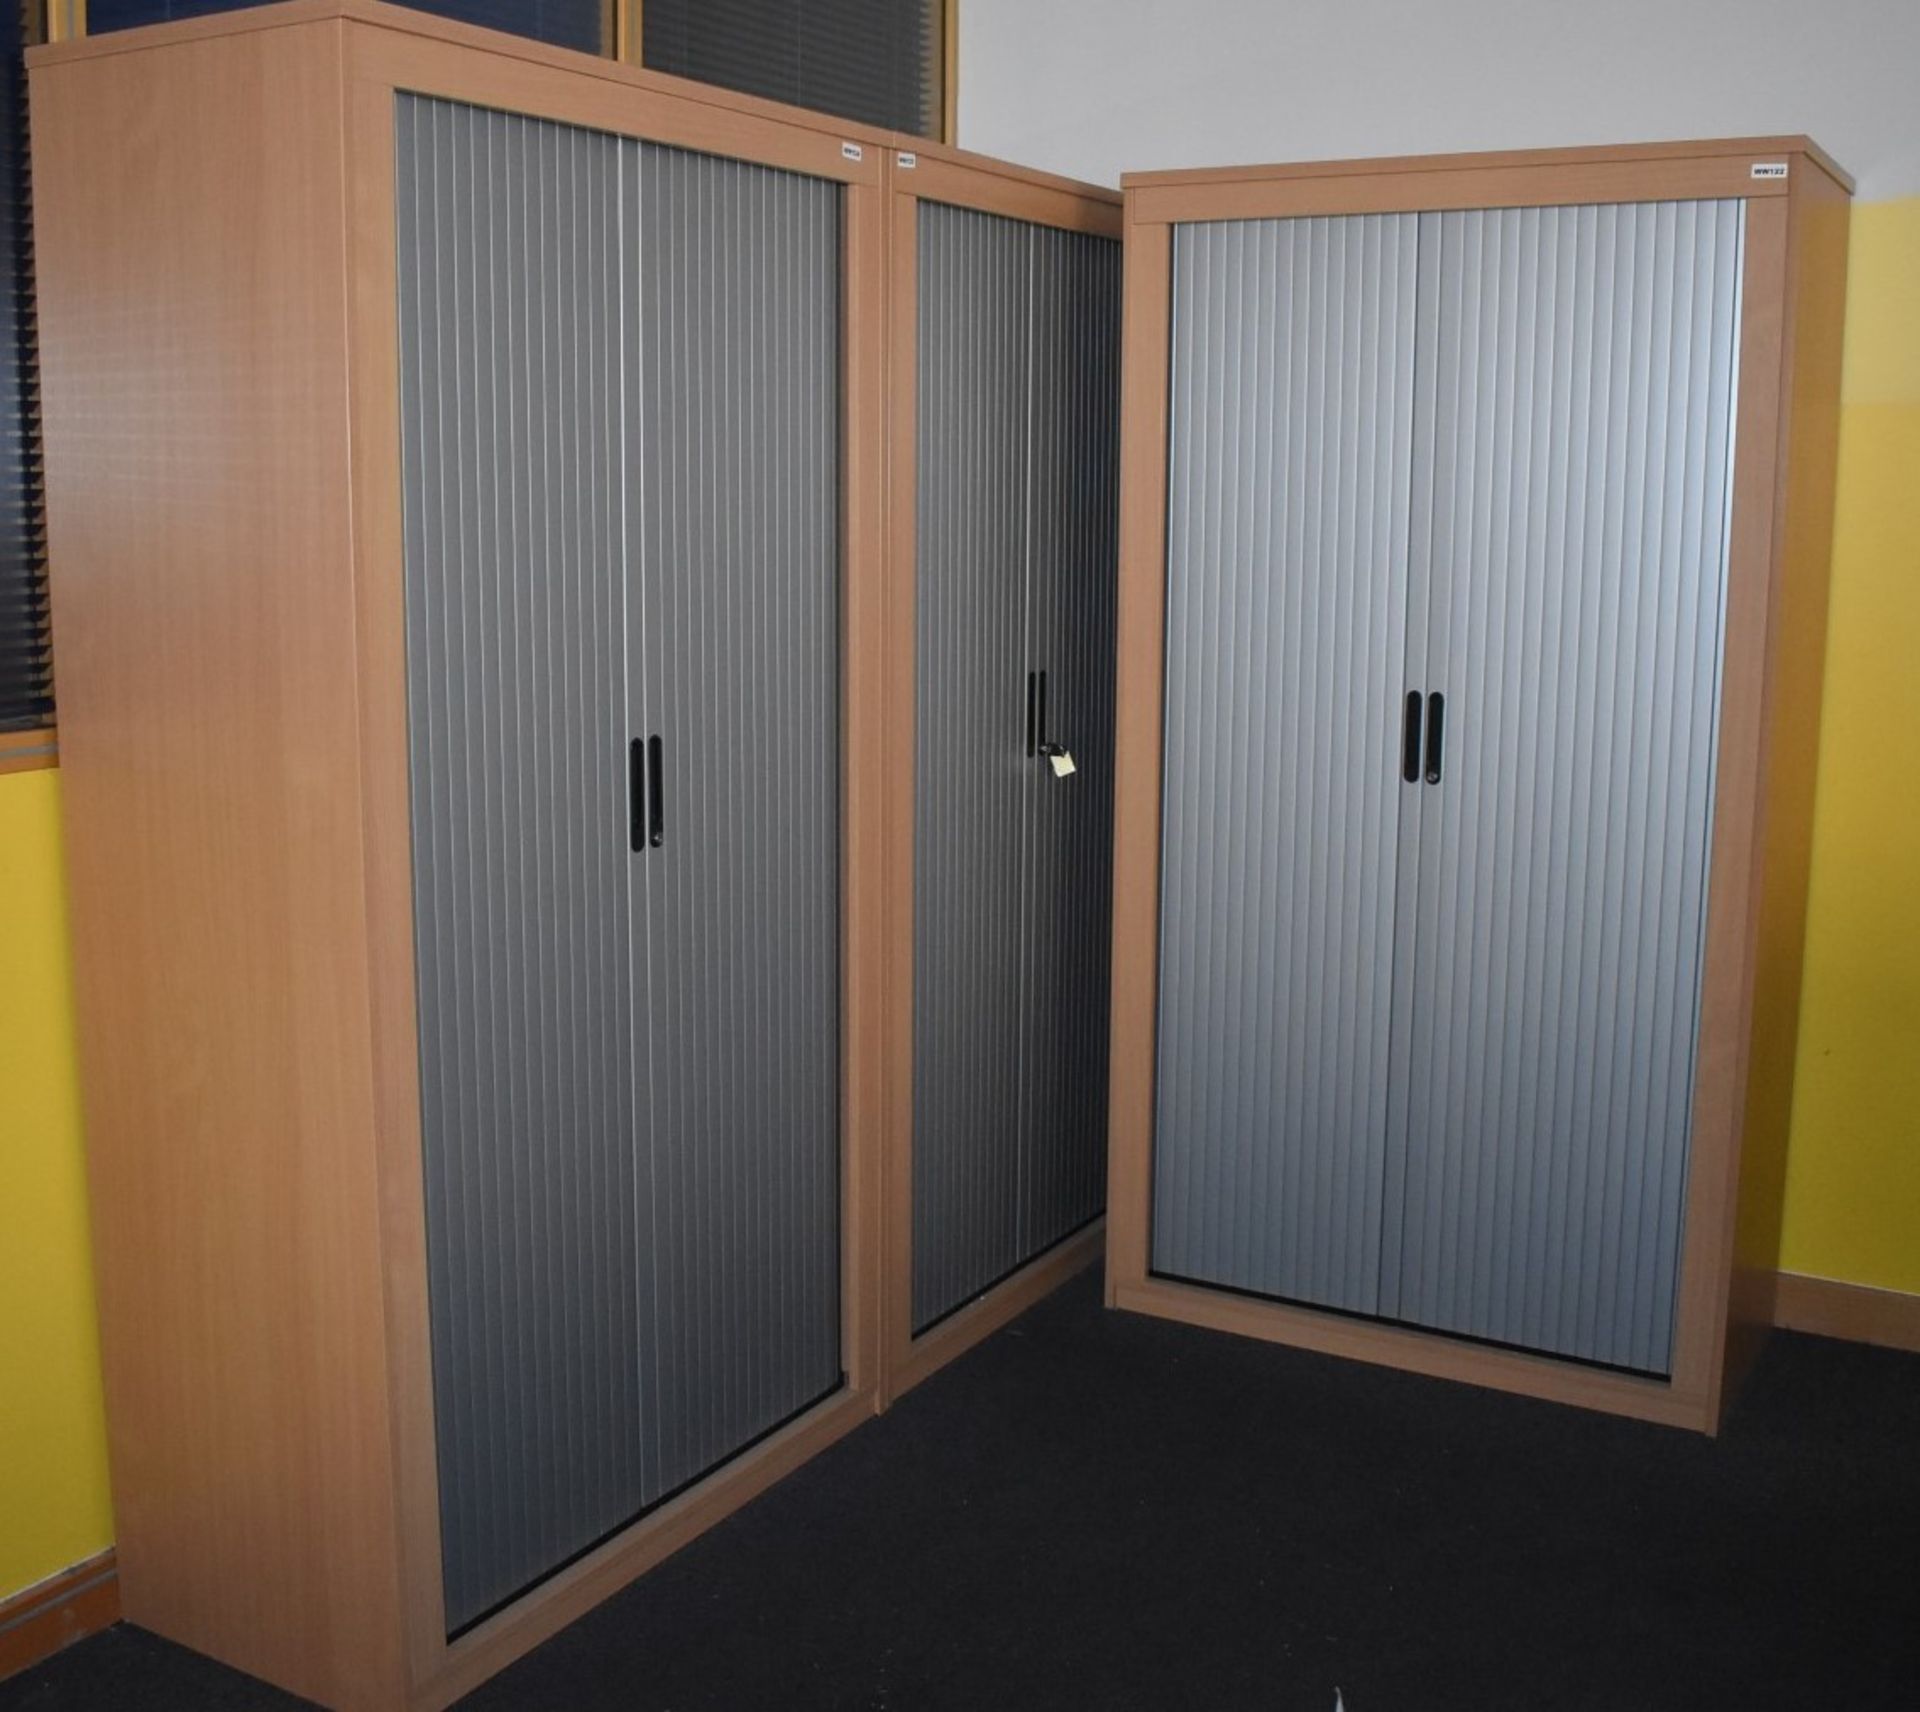 1 x Tambour Door Office Storge Cabinet in Beech and Silver - Modern Design With Four Internal - Image 2 of 3